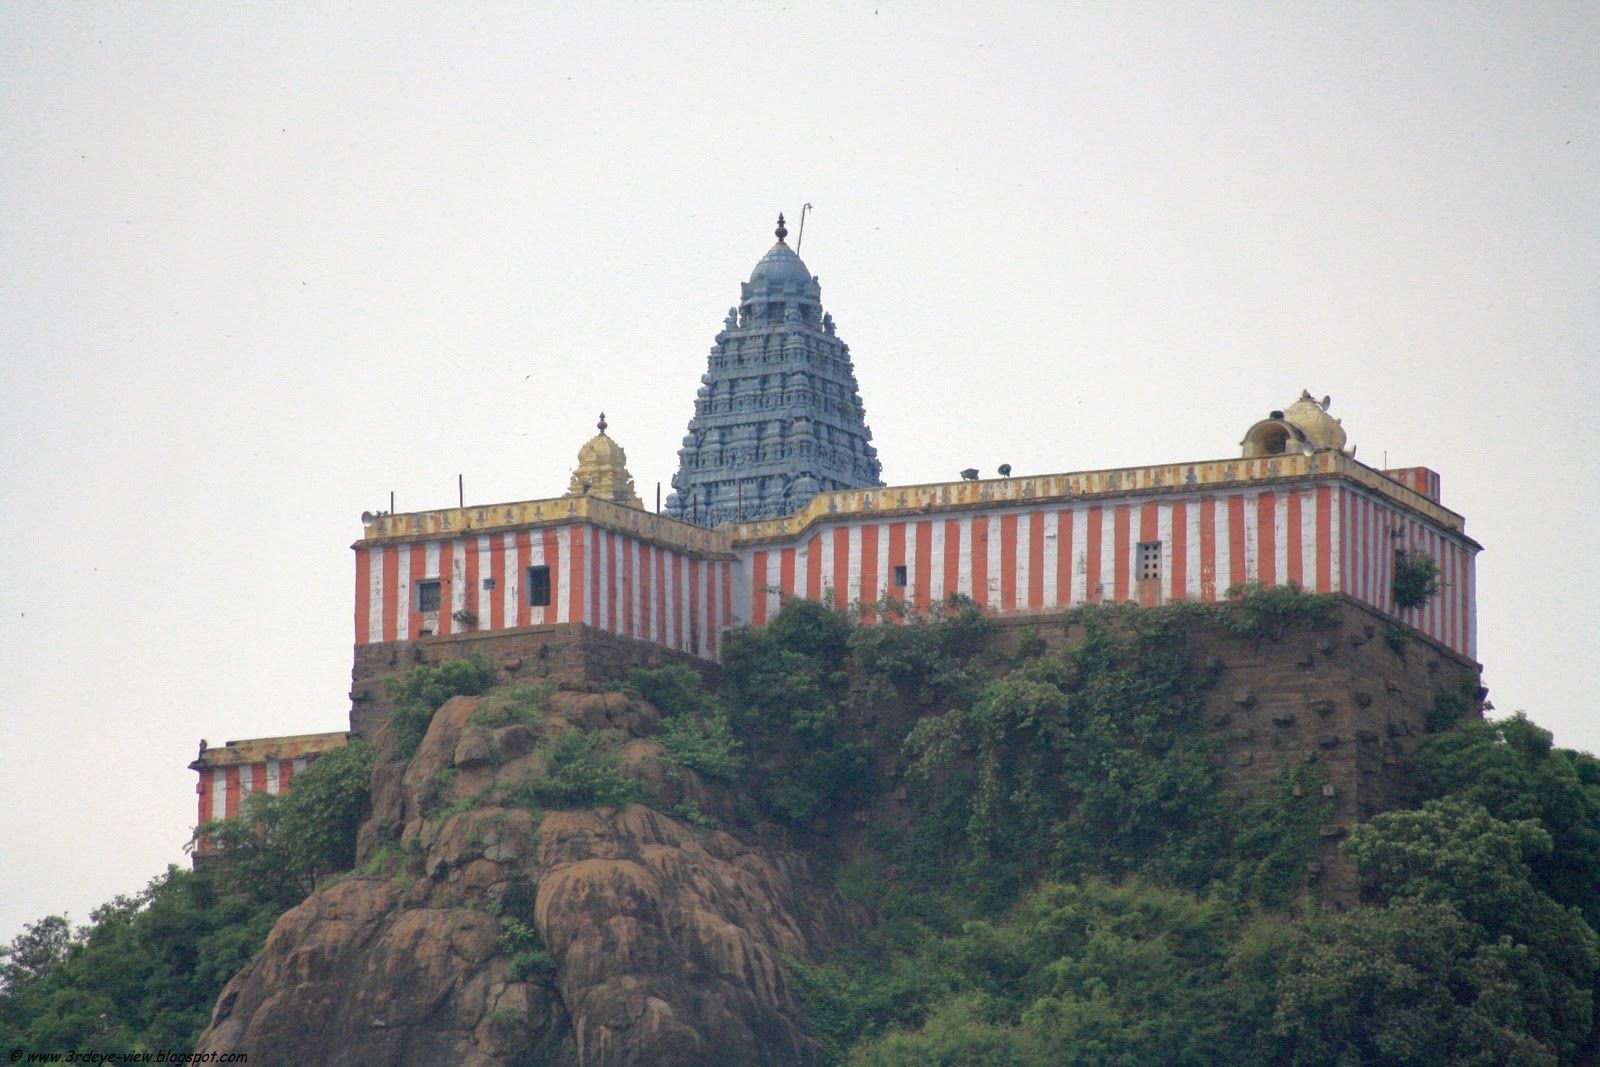 The temple on the top of the hills